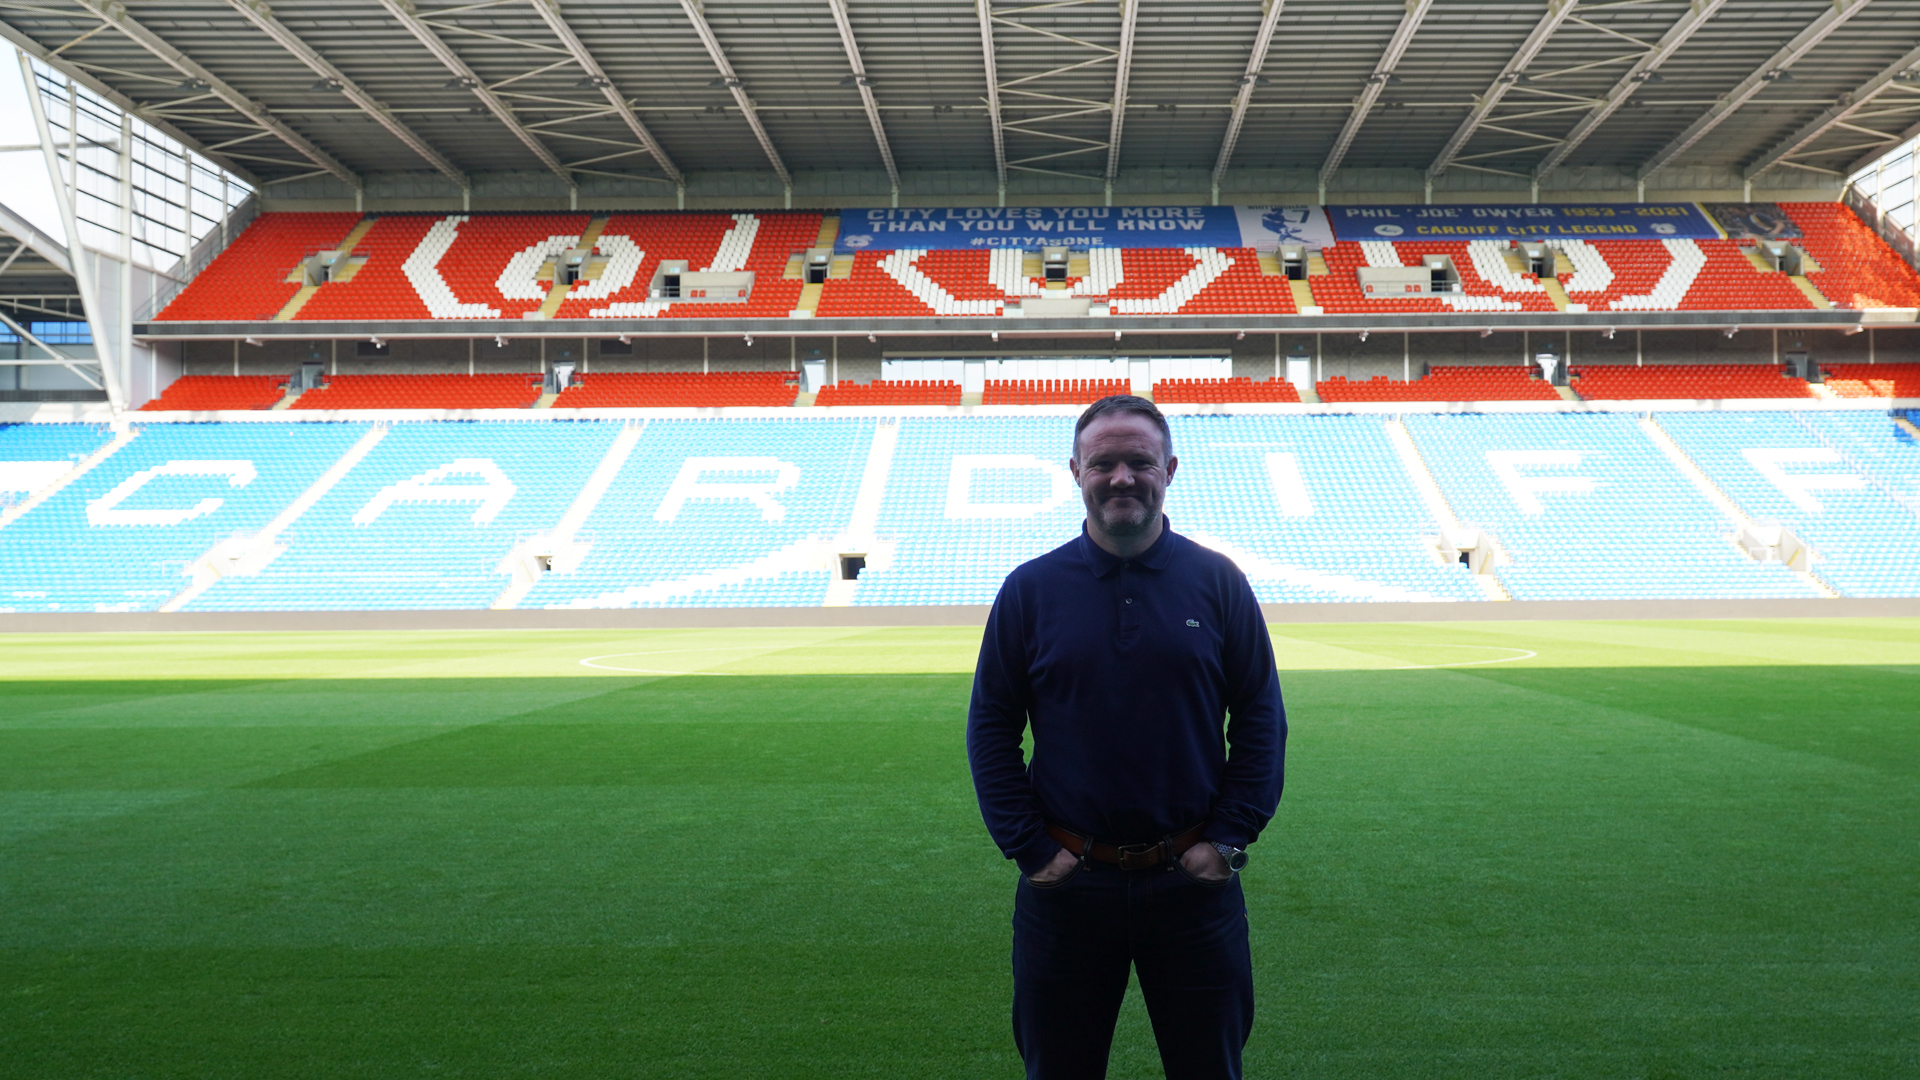 Gavin Chesterfield will join the Bluebirds on November 14th, as the new Academy Manager...